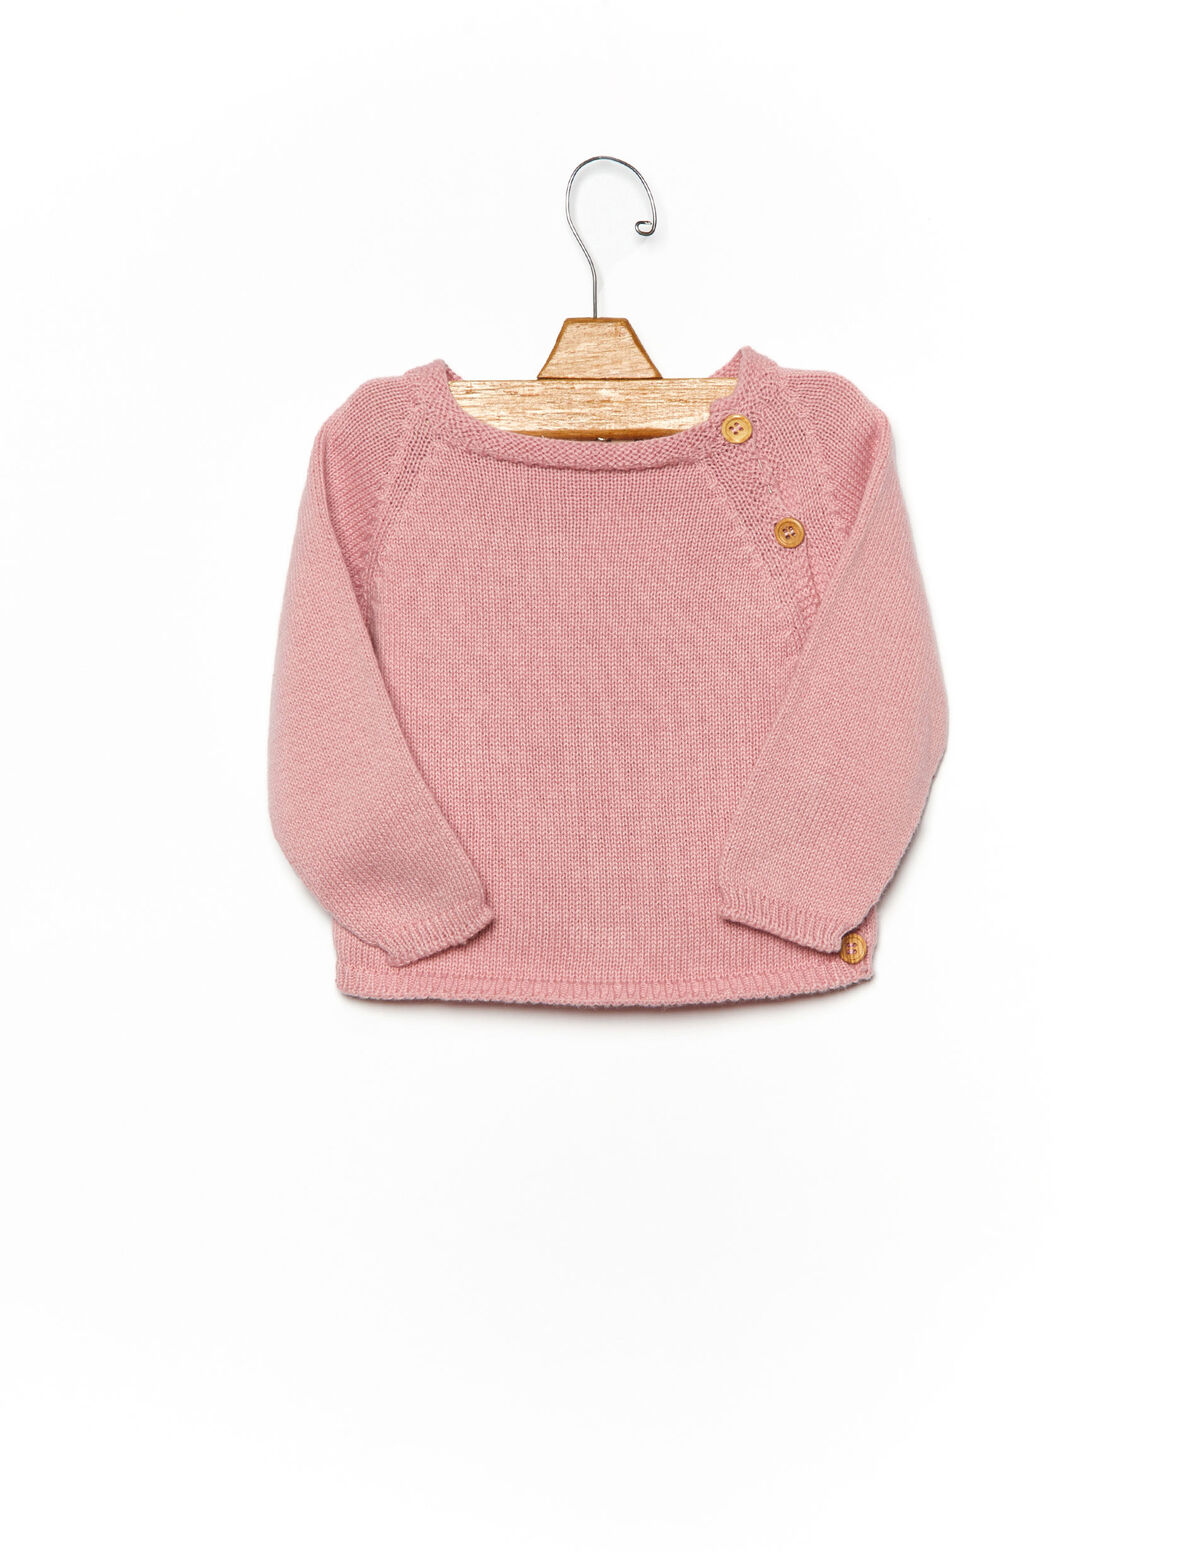 Pink jumper with buttons - Knitwear - Nícoli